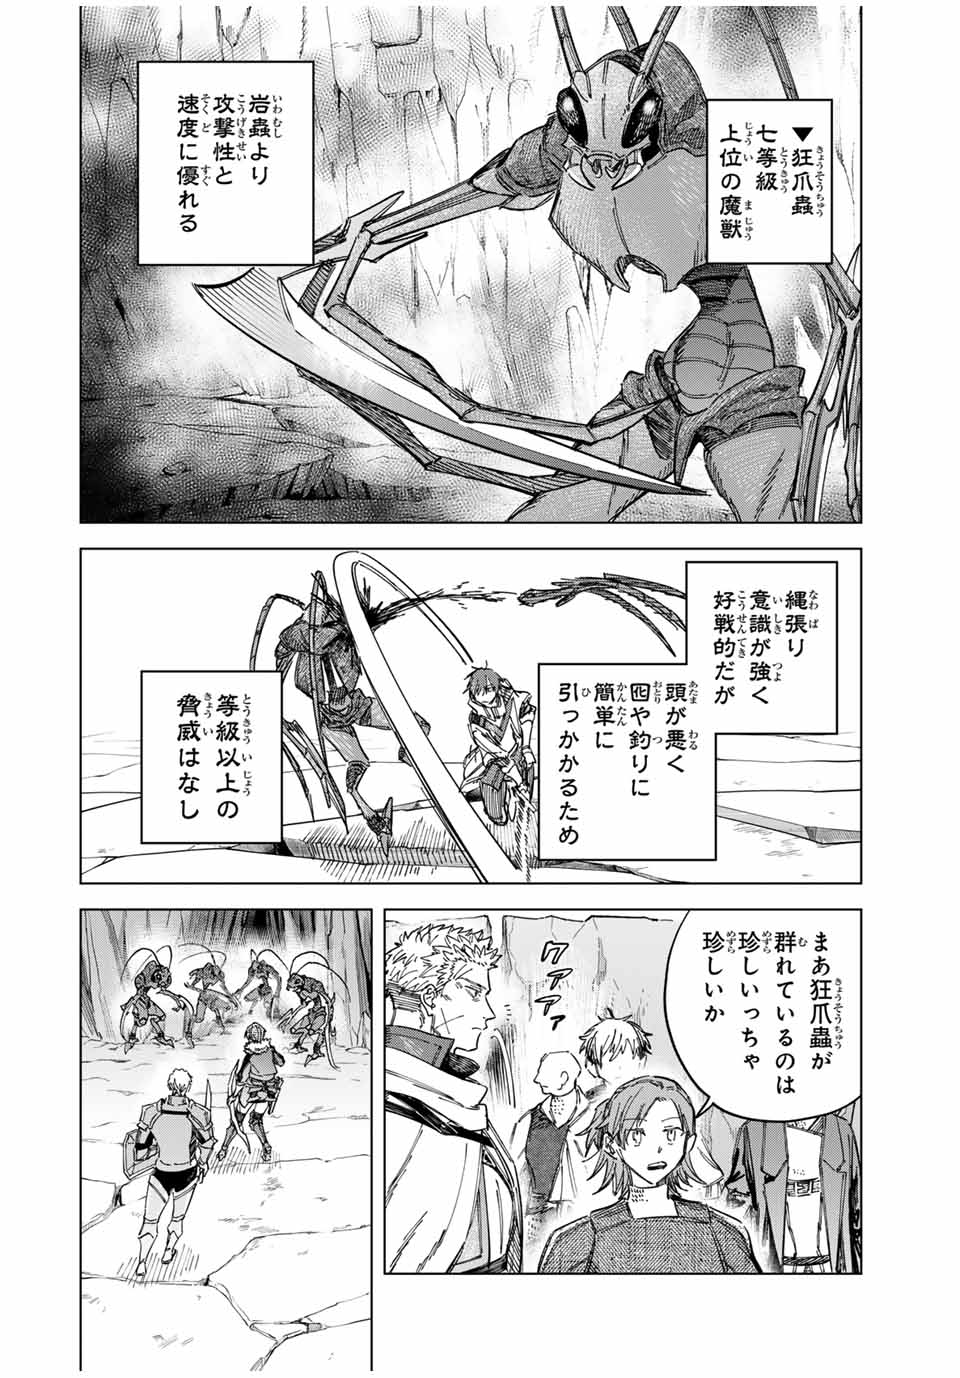 Witch and Mercenary 魔女と傭兵 第17話 - Page 12